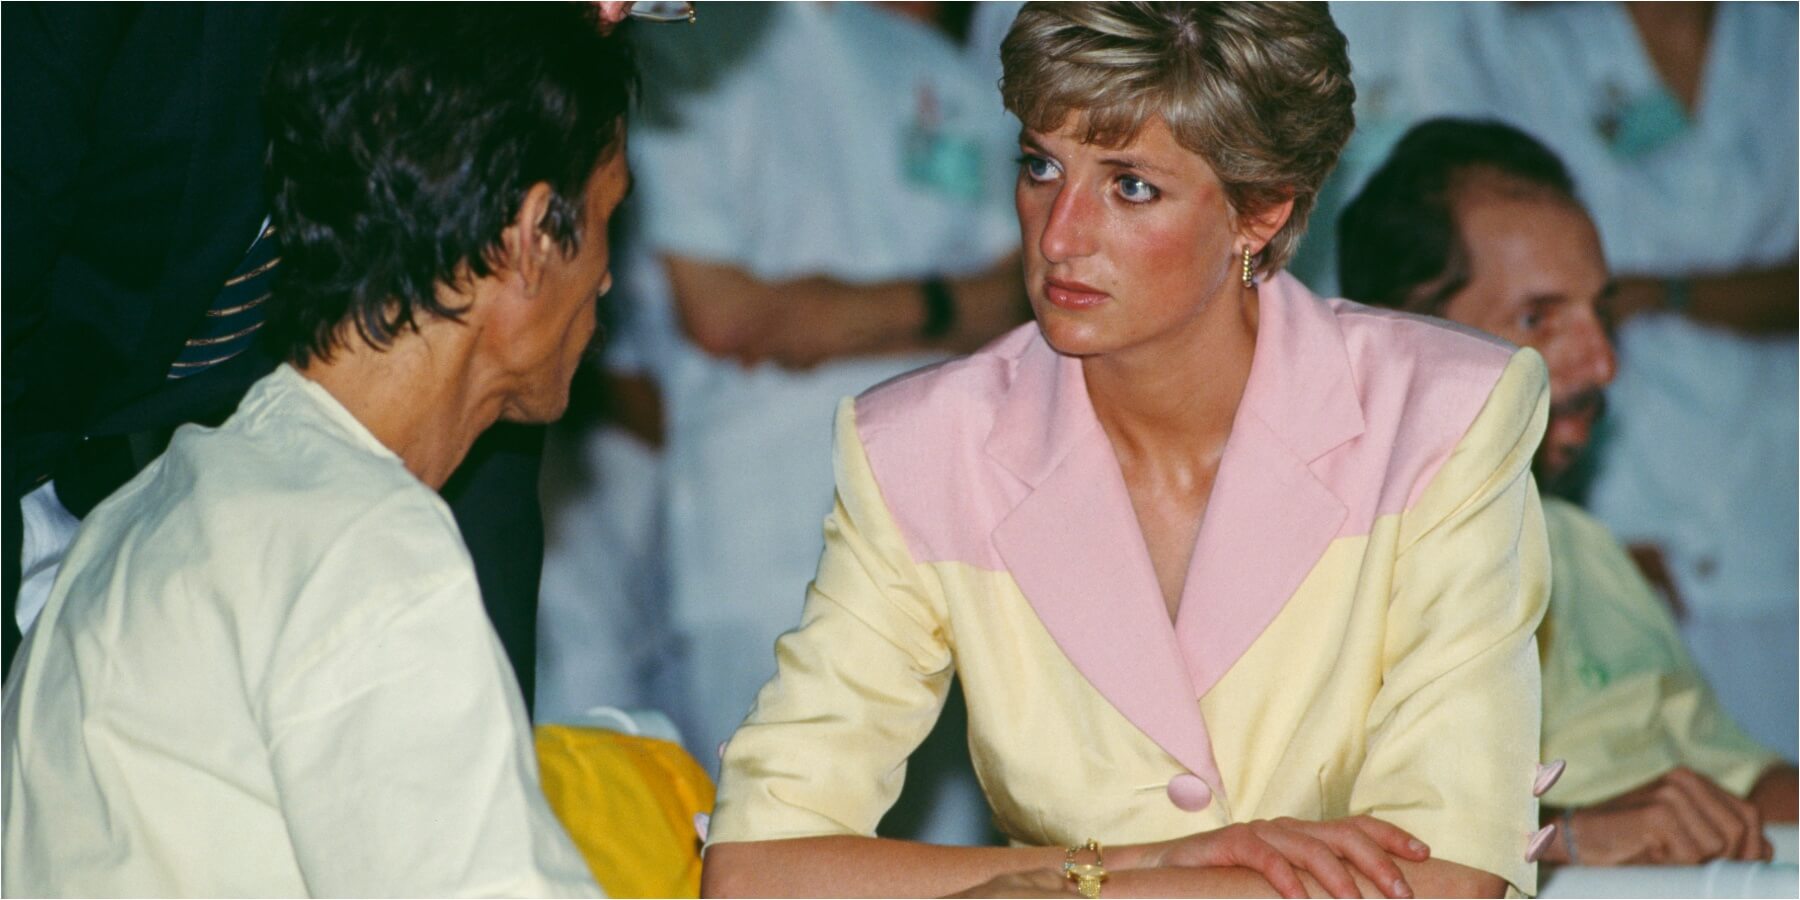 Princess Diana meets with AIDS patients in 1991.